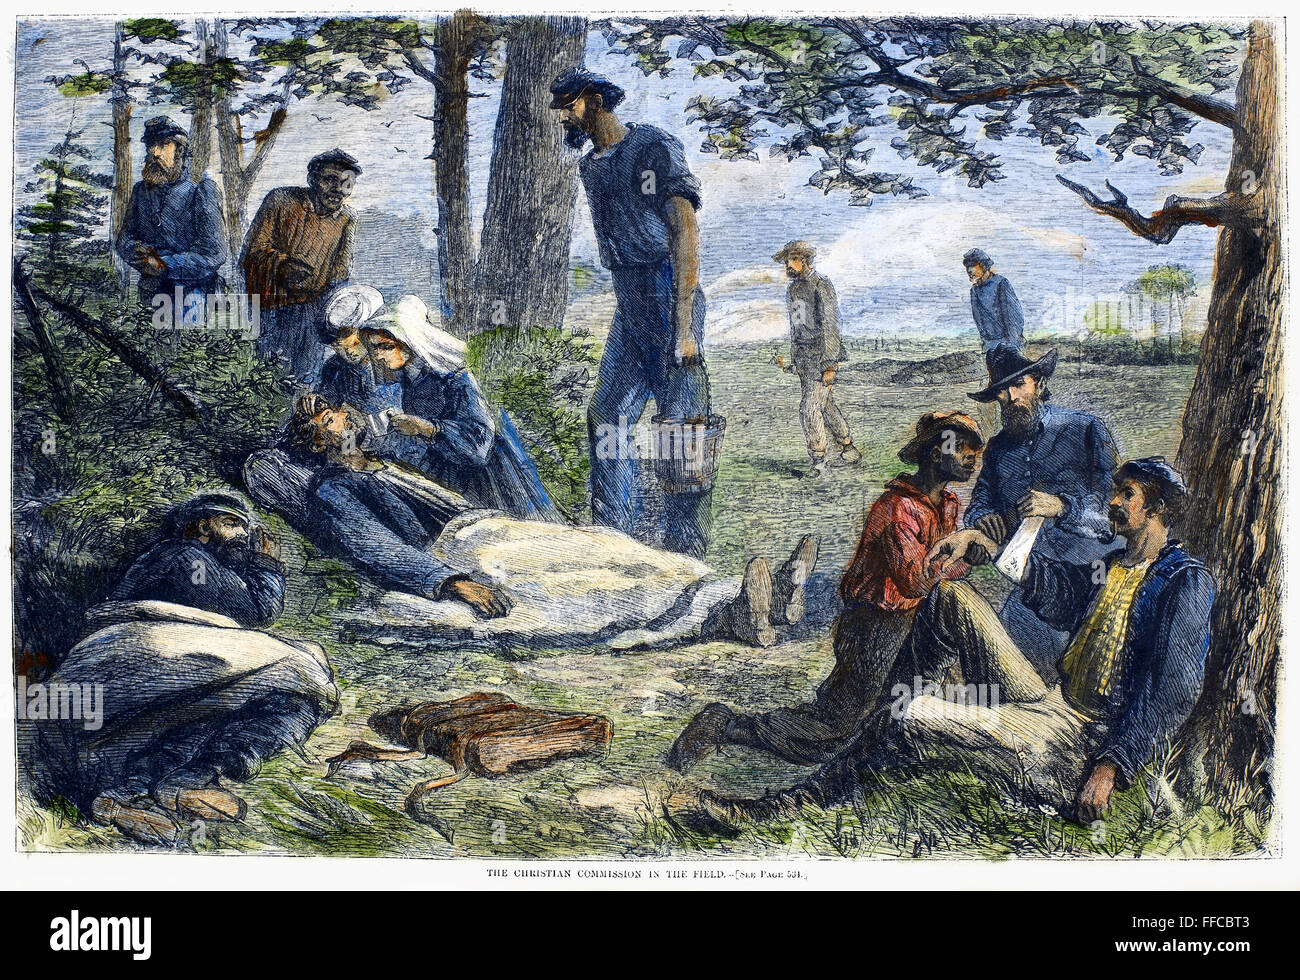 CIVIL WAR: WOUNDED, 1864. /nVolunteers of the Christian Commission give first aid to wounded Union soldiers at a battlefield during the American Civil War. Wood engraving, American, 1864. Stock Photo